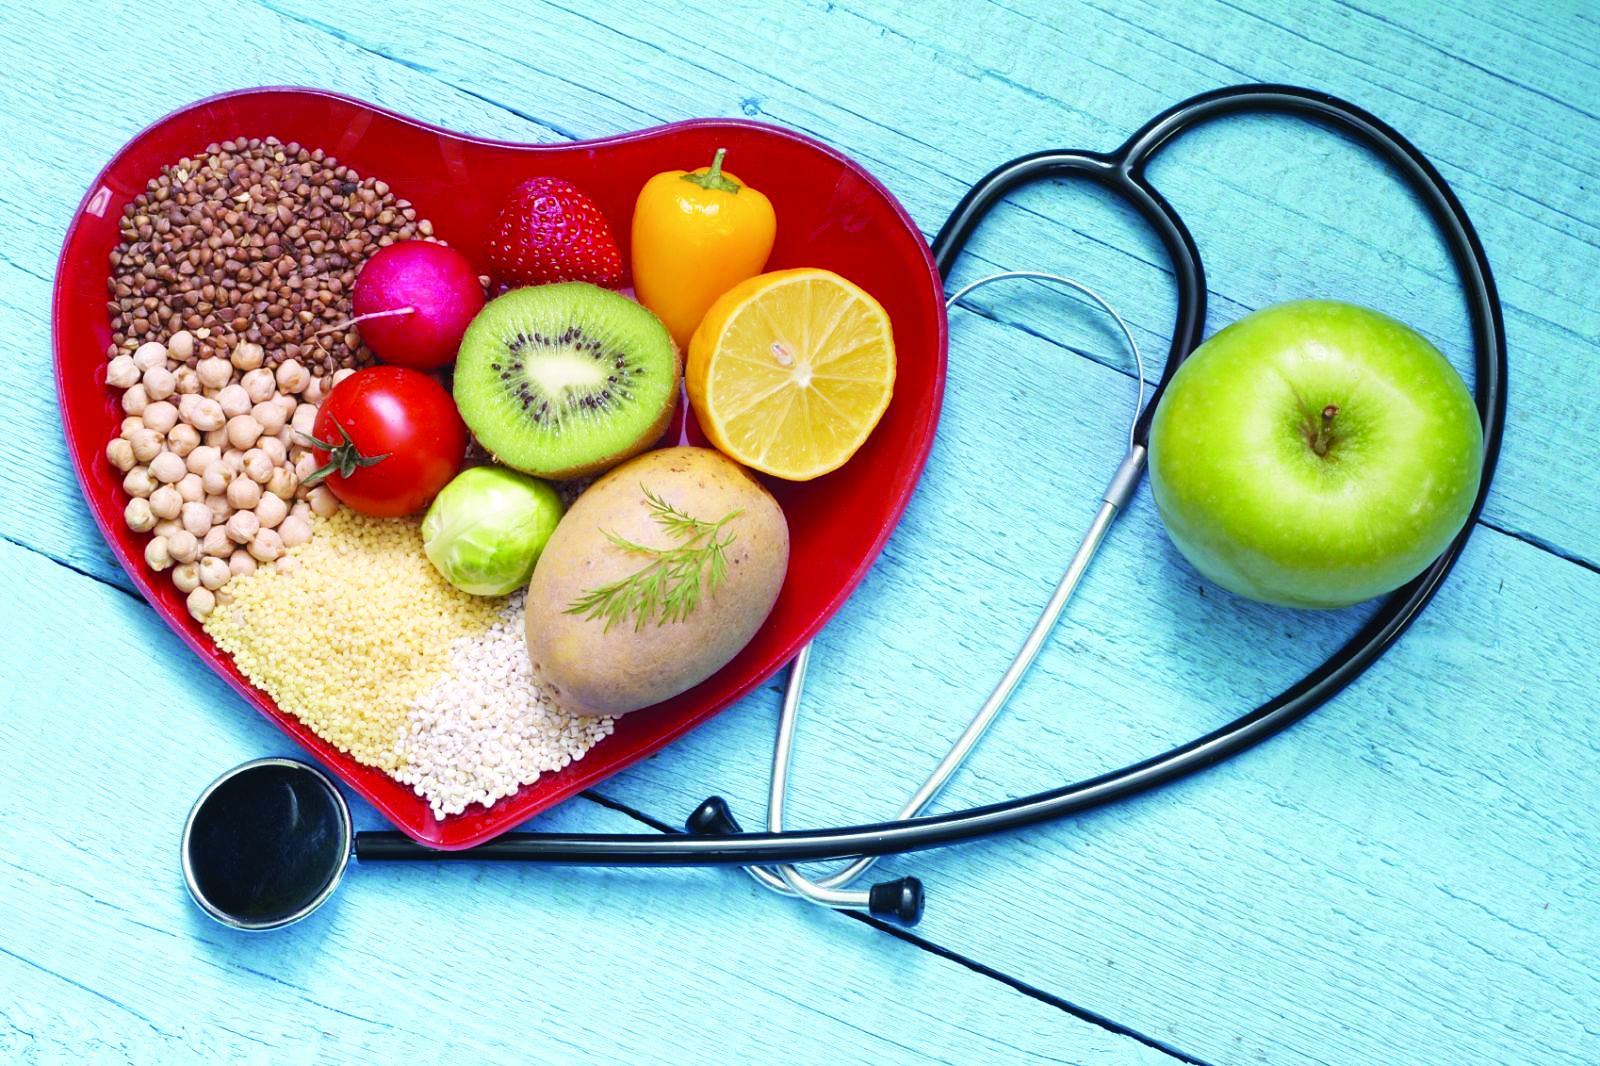 Heart-friendly fare: Foods for Dyslipidemia prevention